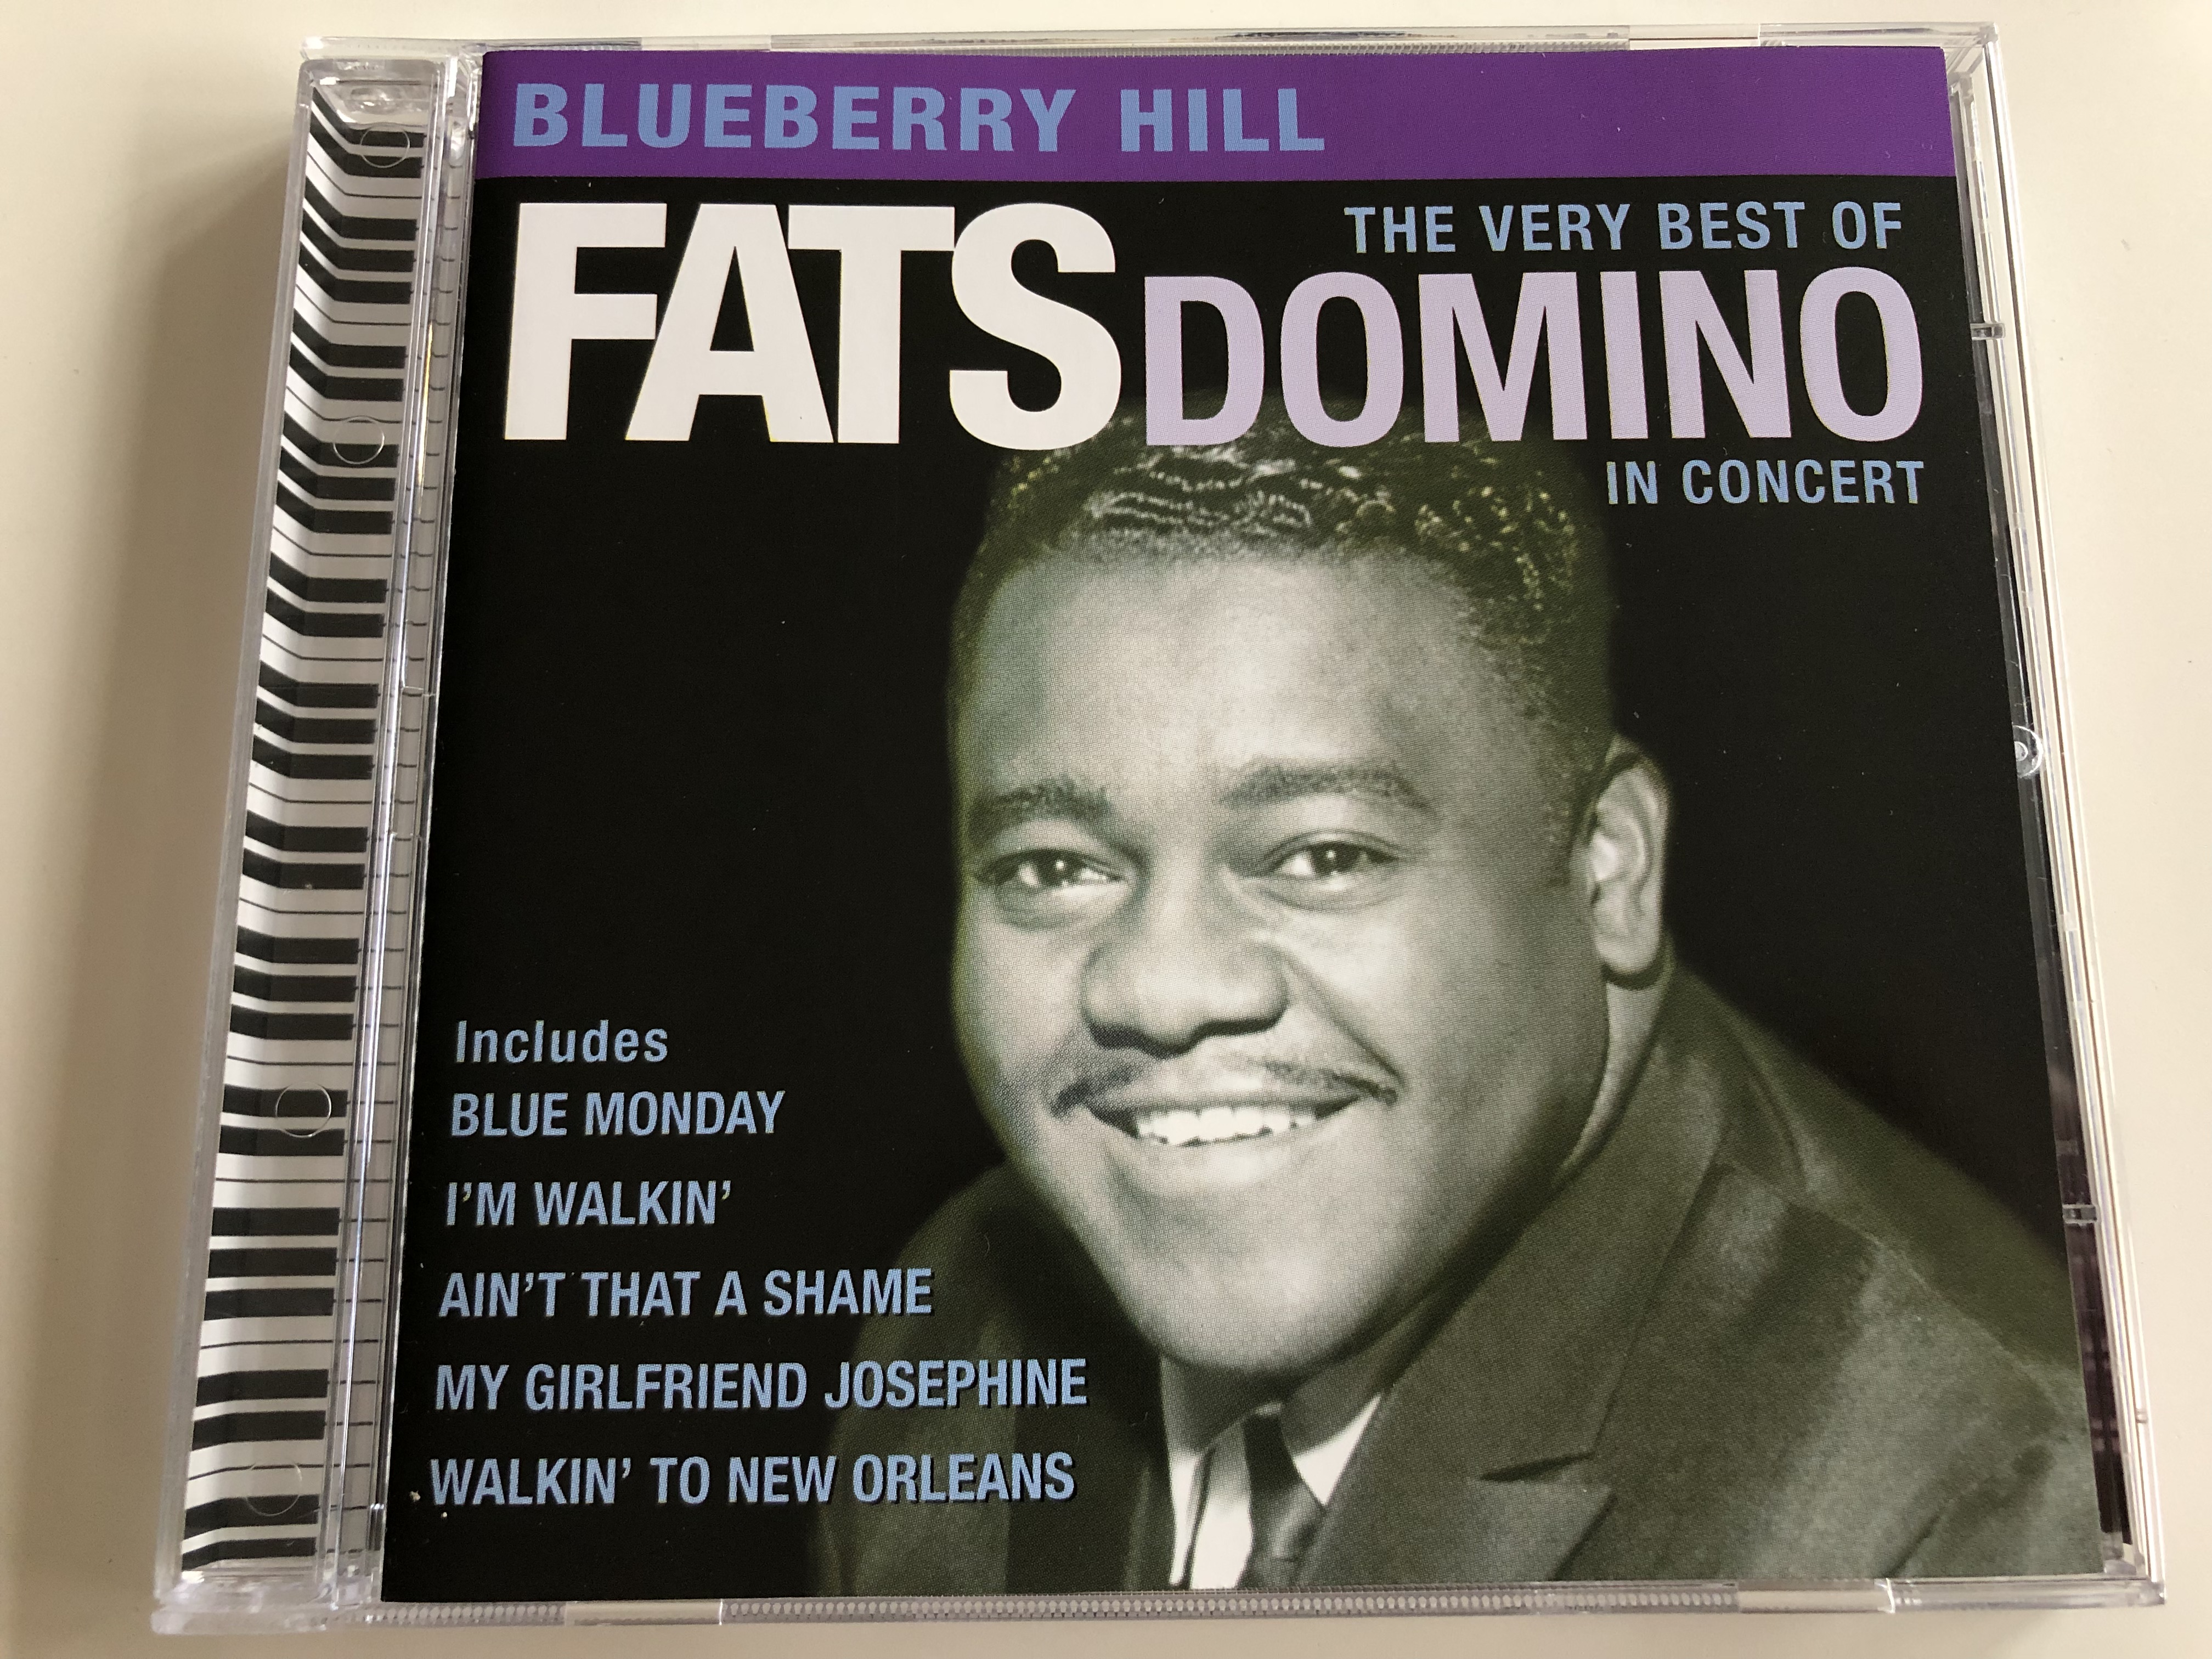 blueberry-hill-the-very-best-of-fats-domino-in-concert-audio-cd-1997-platcd-220-1-.jpg